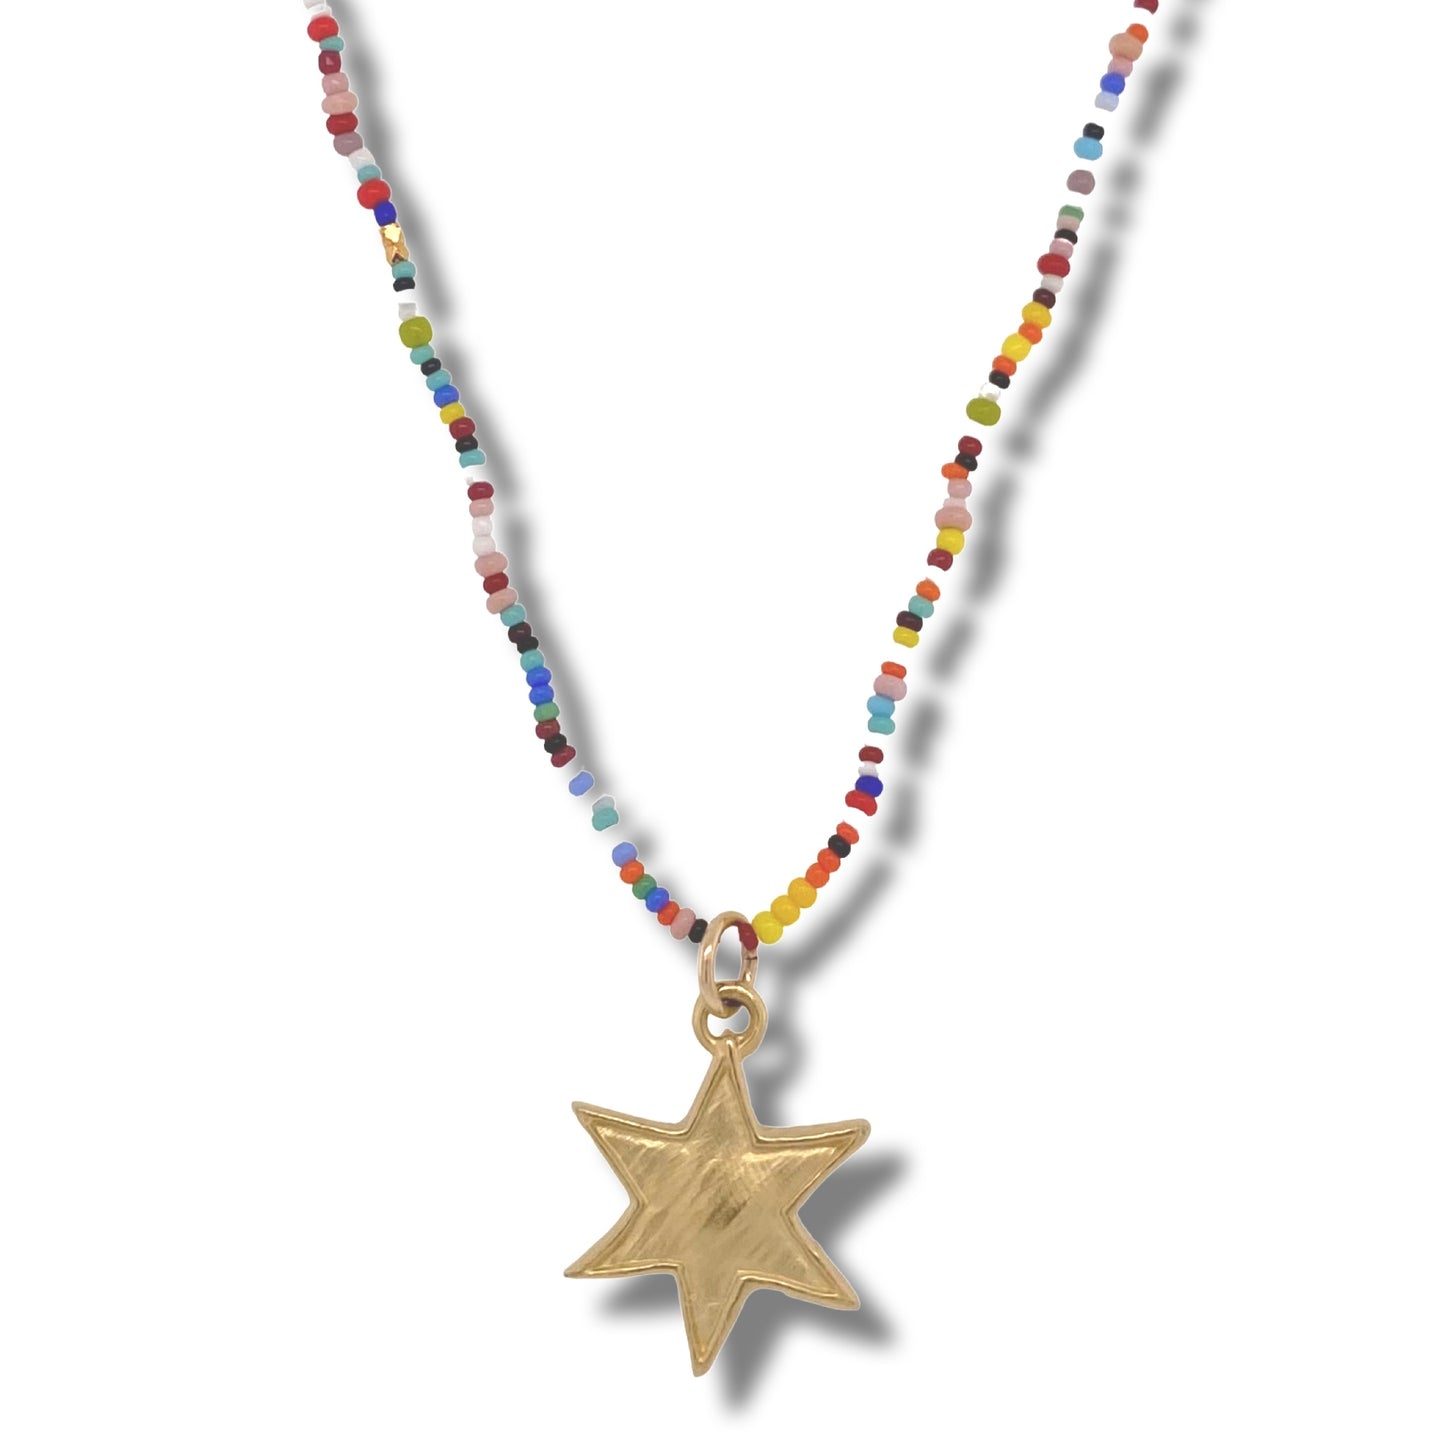 277nlgmc - Large Star Charm in Gold on Multi Color Beads